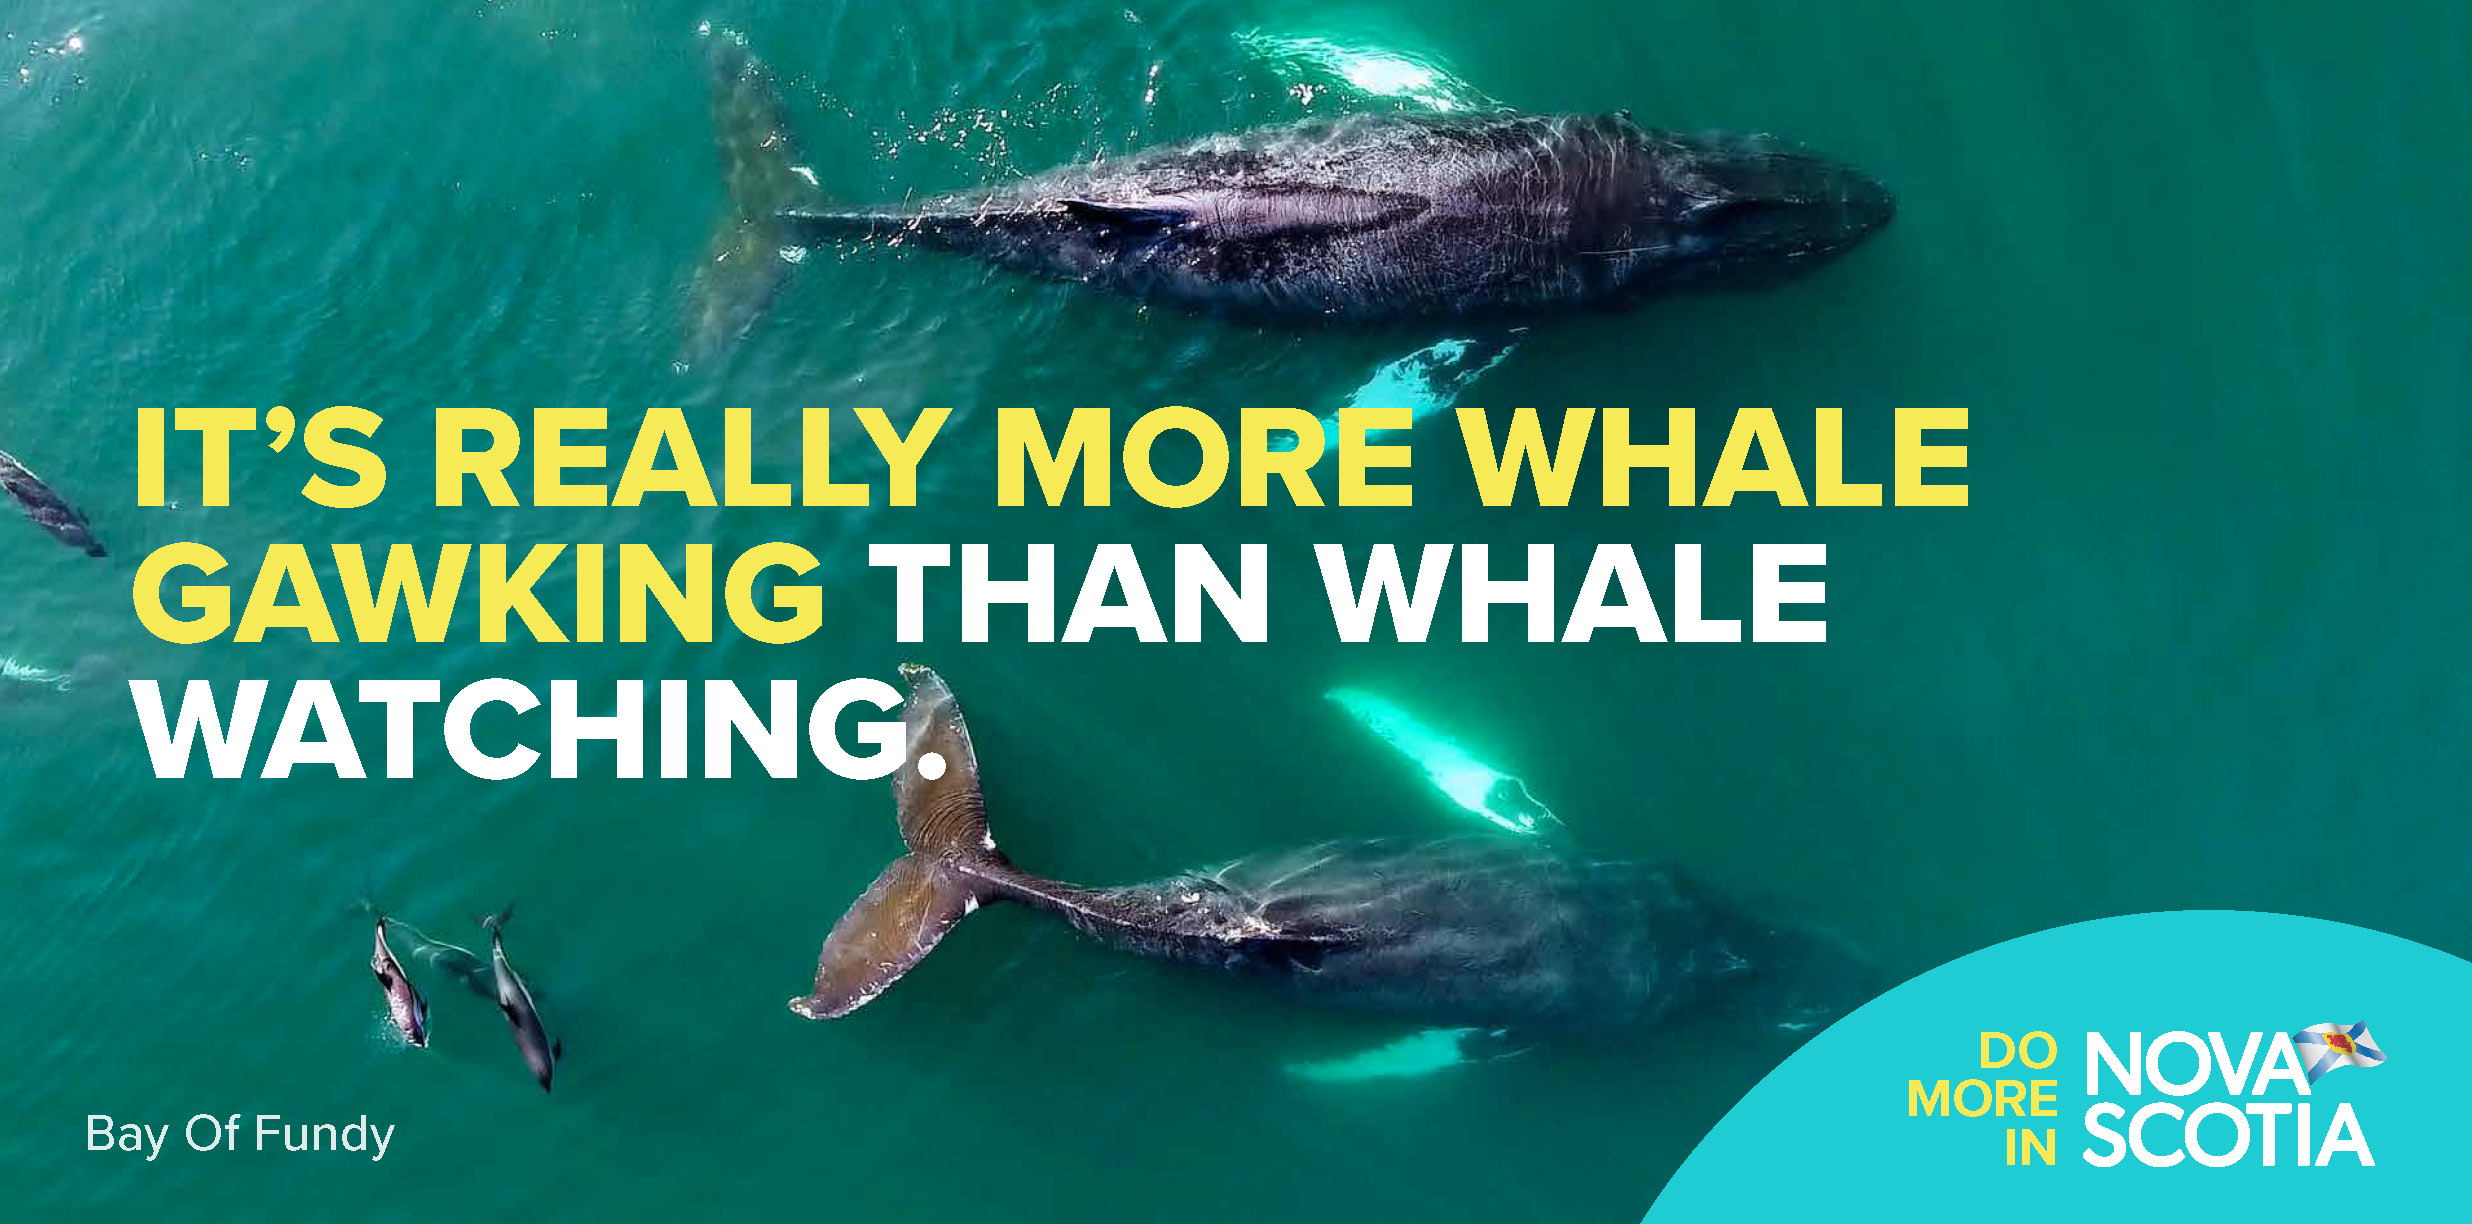 Image of two whales from above. Text reads: It's really more whale gawking than whale watching.